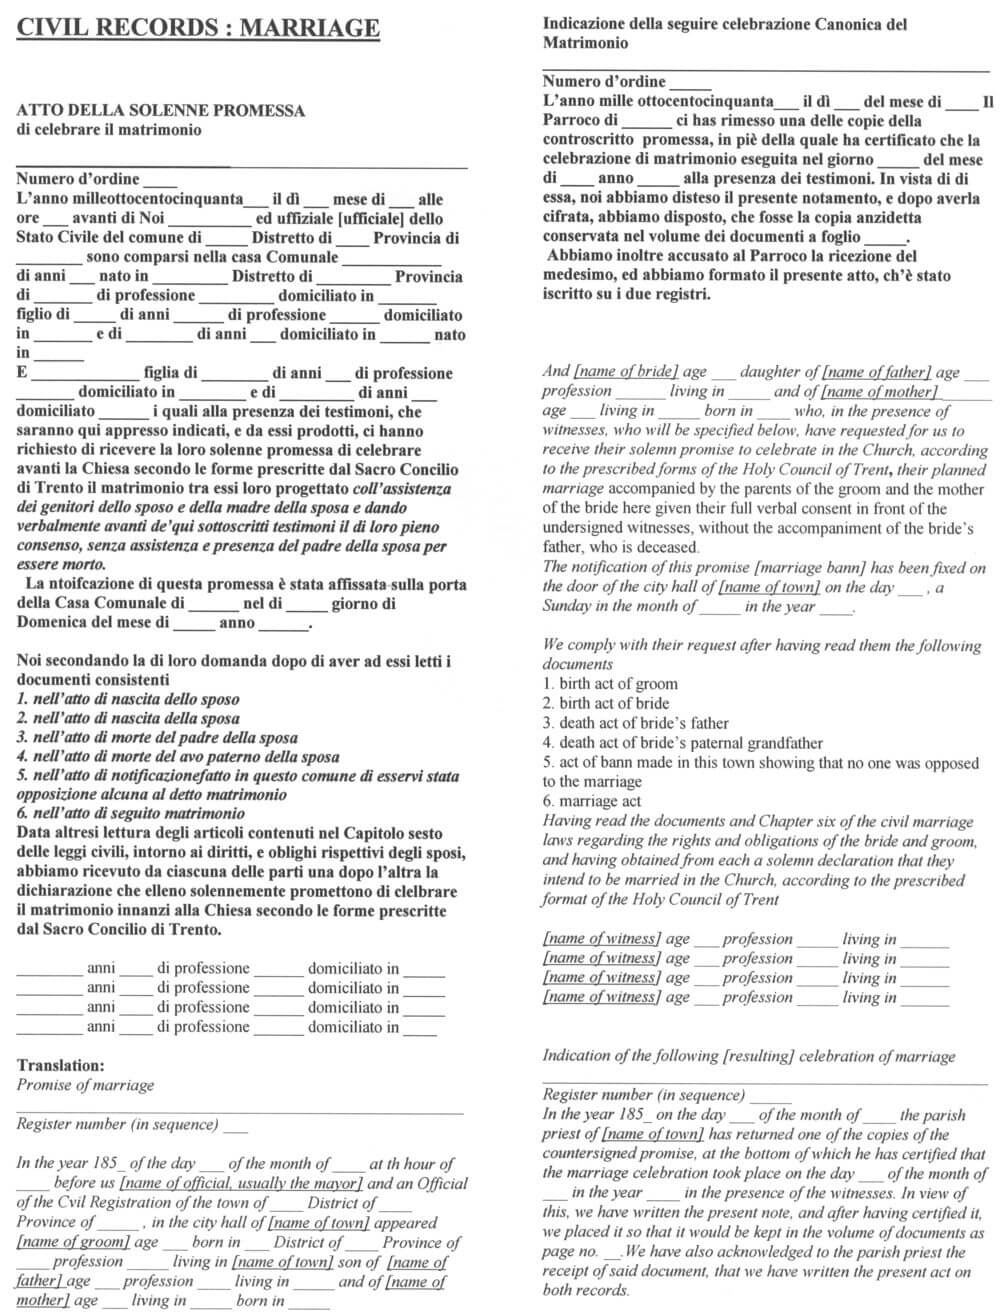 Italian Marriage Document Translations Genealogy With Marriage Certificate Translation Template